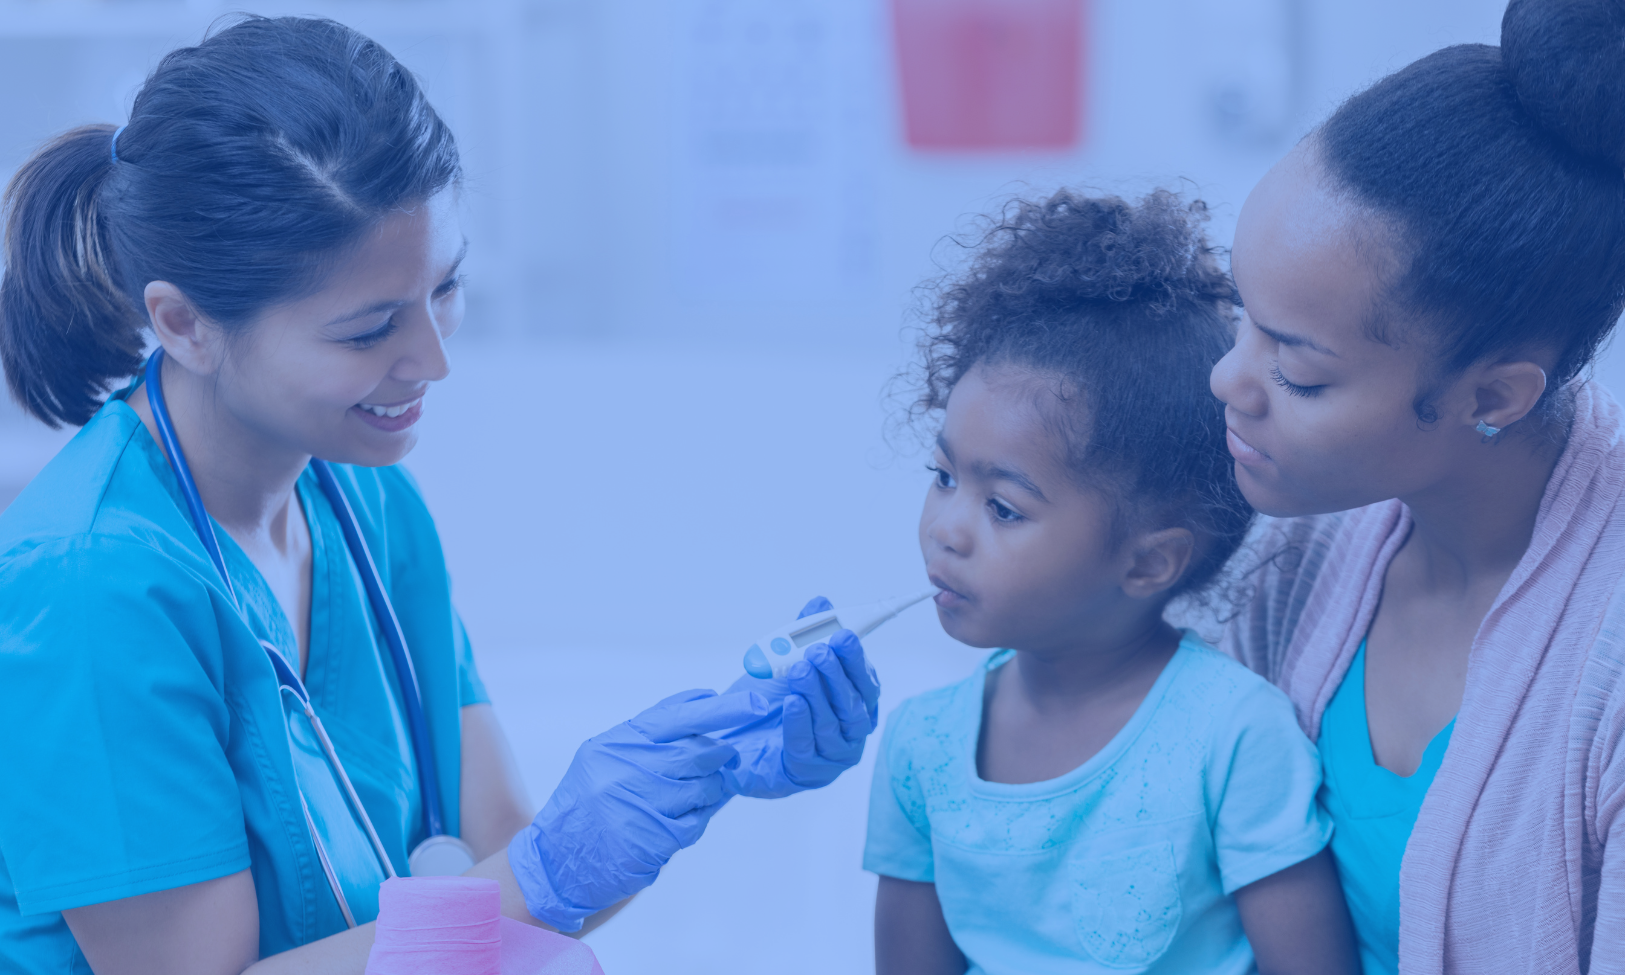 Image of a young girl receiving a medical examination from a nurse using a digital thermometer, while her mother closely watches. The nurse, in blue scrubs, is attentively engaging with the child, who appears calm. The mother, standing beside her daughter, looks on with concern. The setting is a medical office, illuminated in a serene blue tone to create a calm and professional atmosphere.